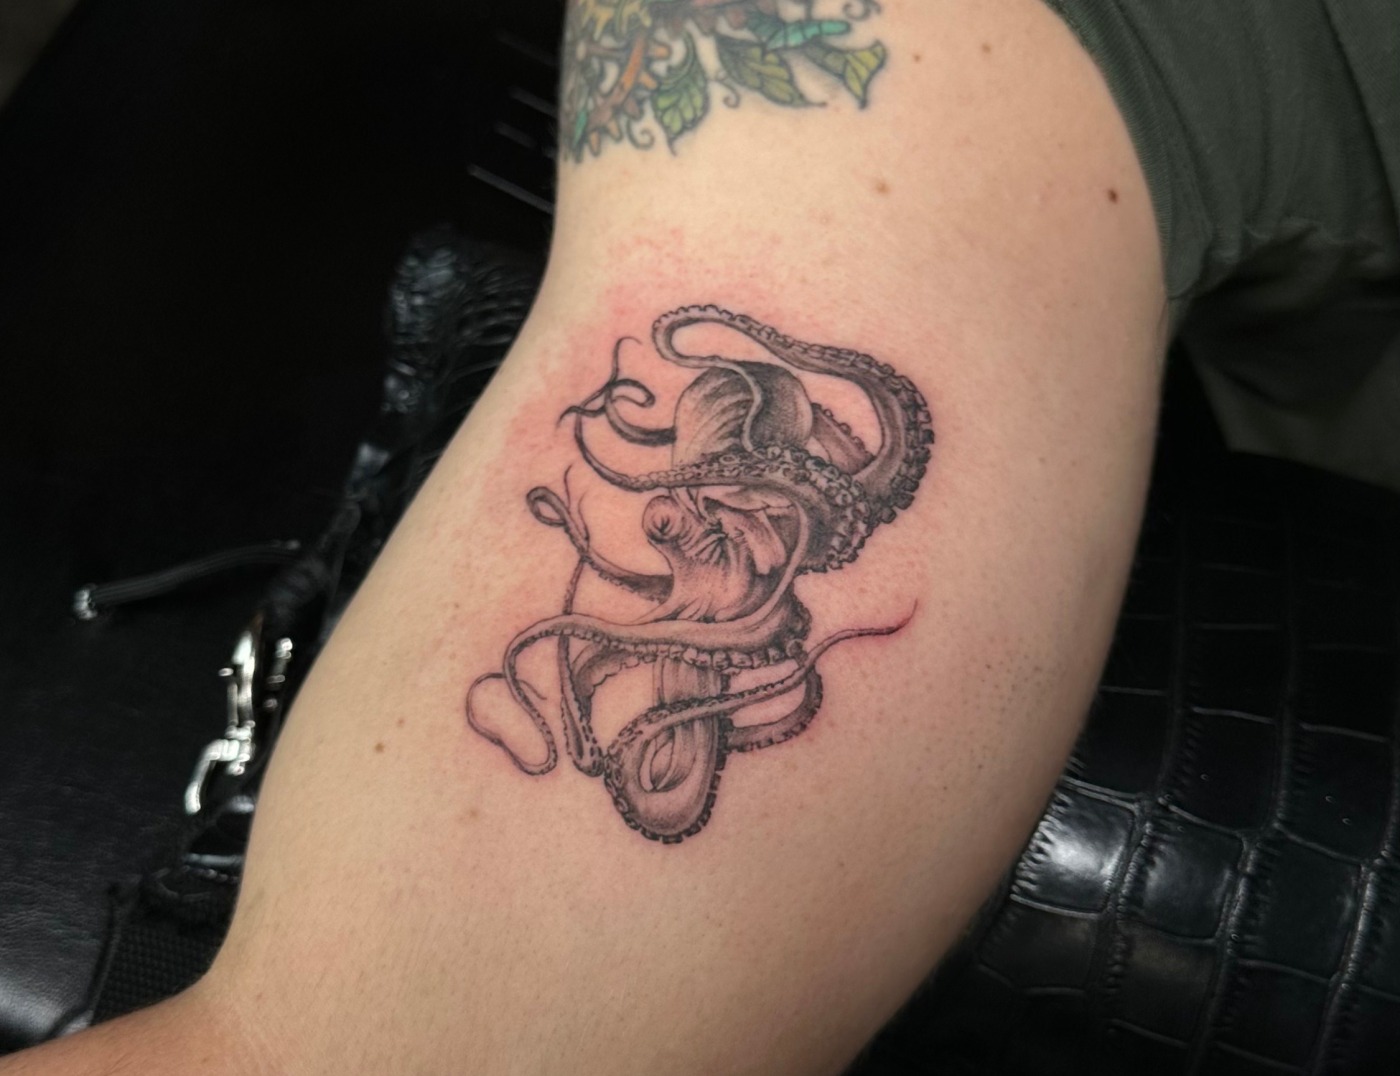 Octopus Black & Gray Realism Tattoo By Choze At Iron Palm Tattoos In Atlanta. Octopus tattoos symbolize knowledge and multitasking. Over the years it has also become a symbol for facing fears. We're open late night until 2AM most nights. Call 404-973-7828 or stop by for a free consultation.